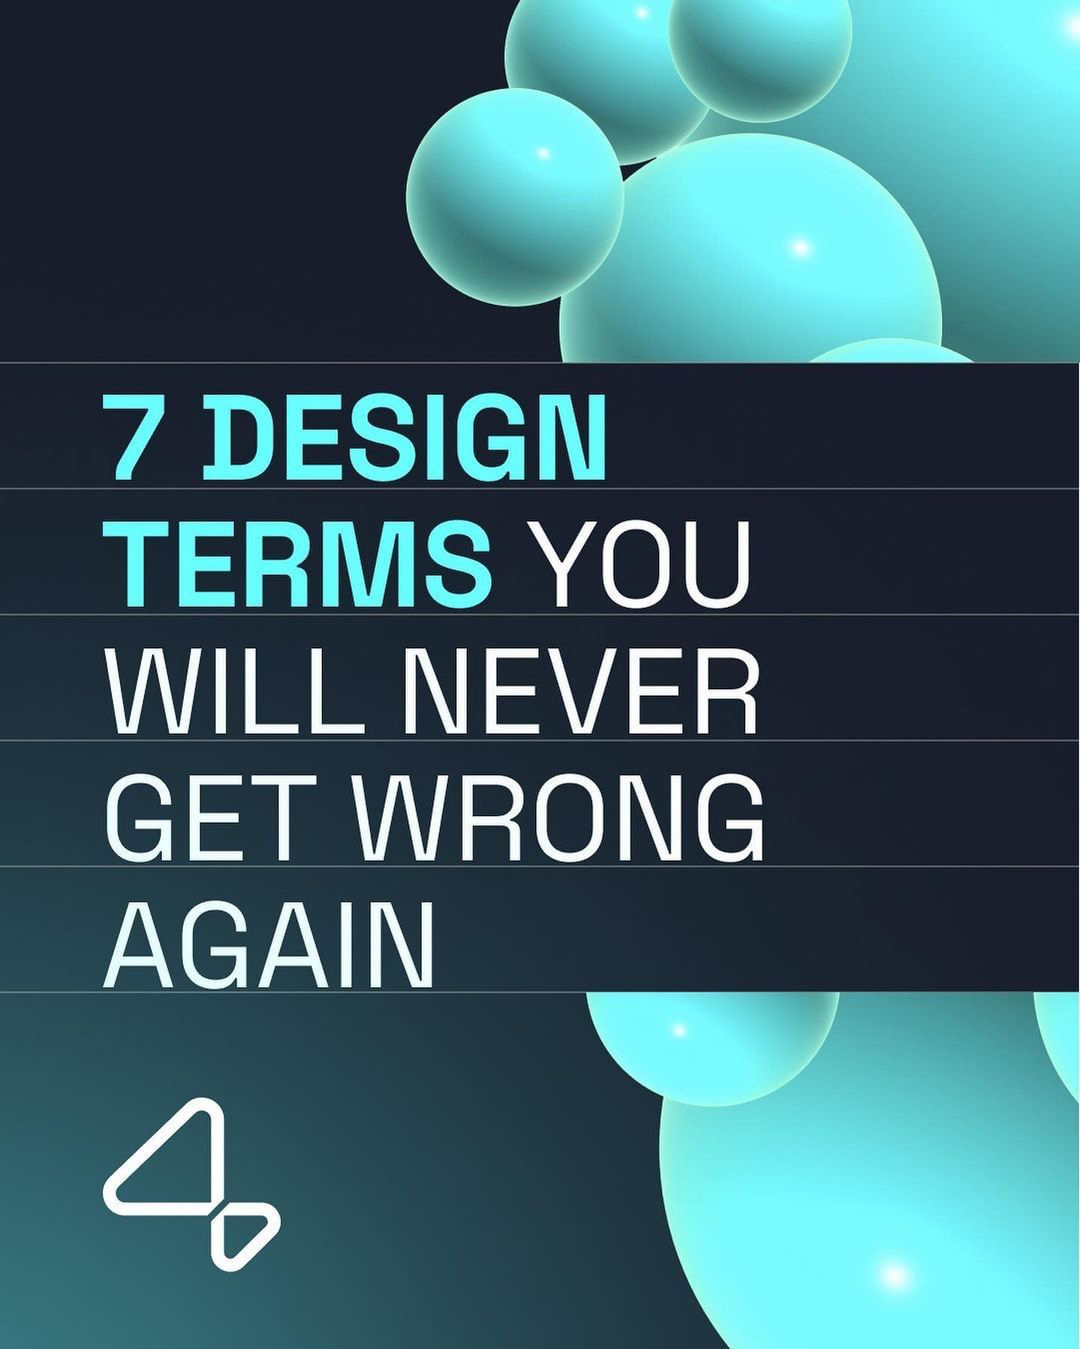 7 Design Terms You Will Never Get Wrong Again